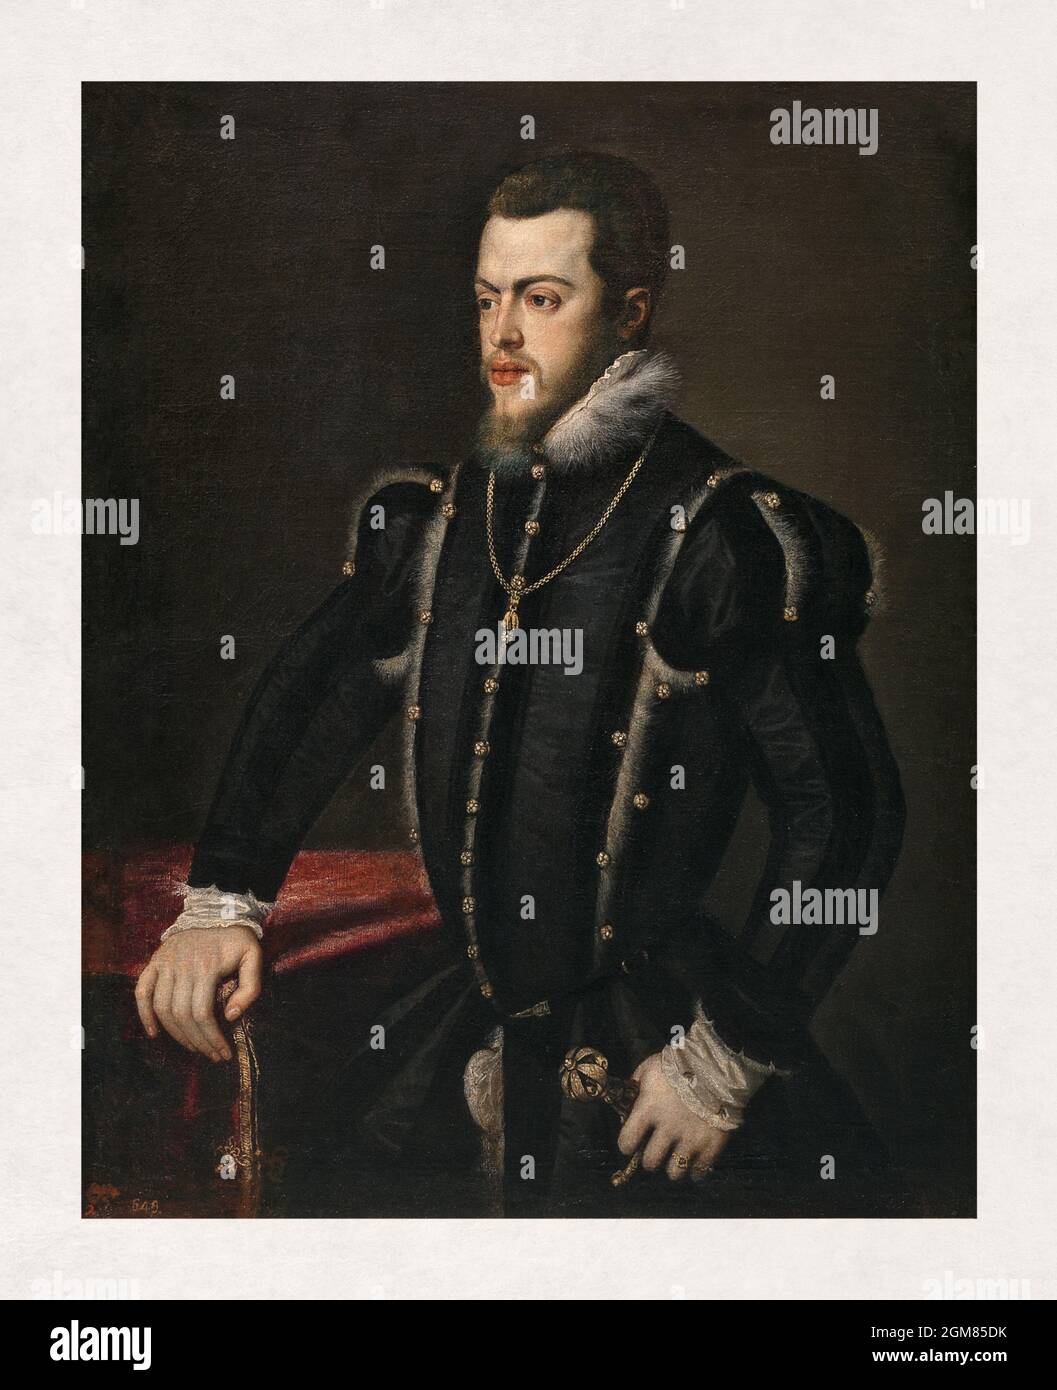 Portrait of Philip II of Spain made by the Italian artist Titian in 1549. Stock Photo